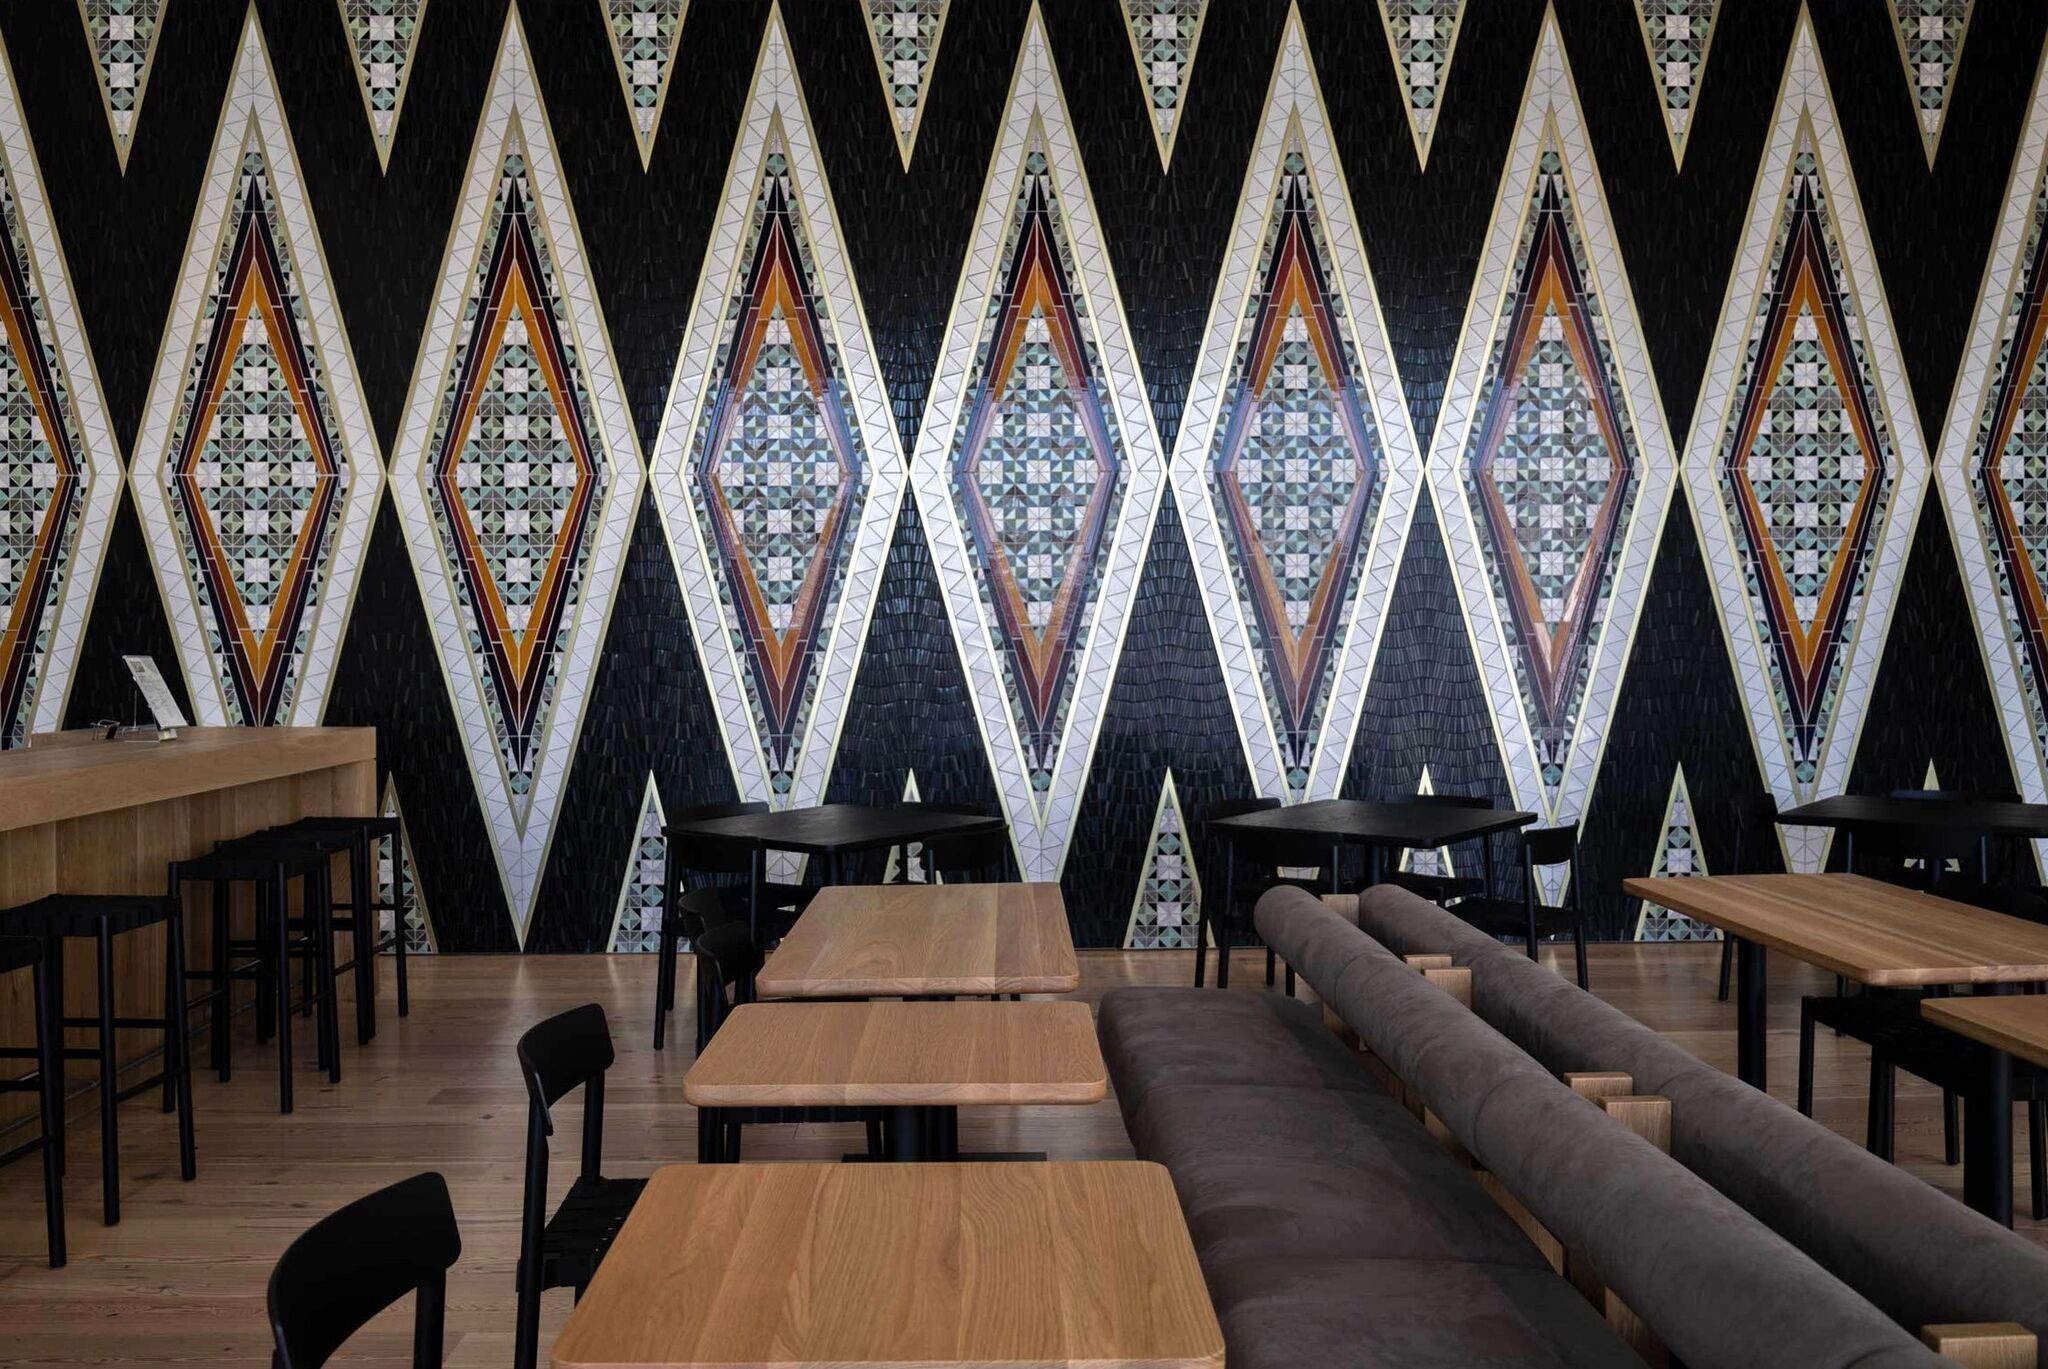 Modern cafe interior with geometric patterned on a mosaic wall, wooden tables, black chairs, and a long cushioned bench.